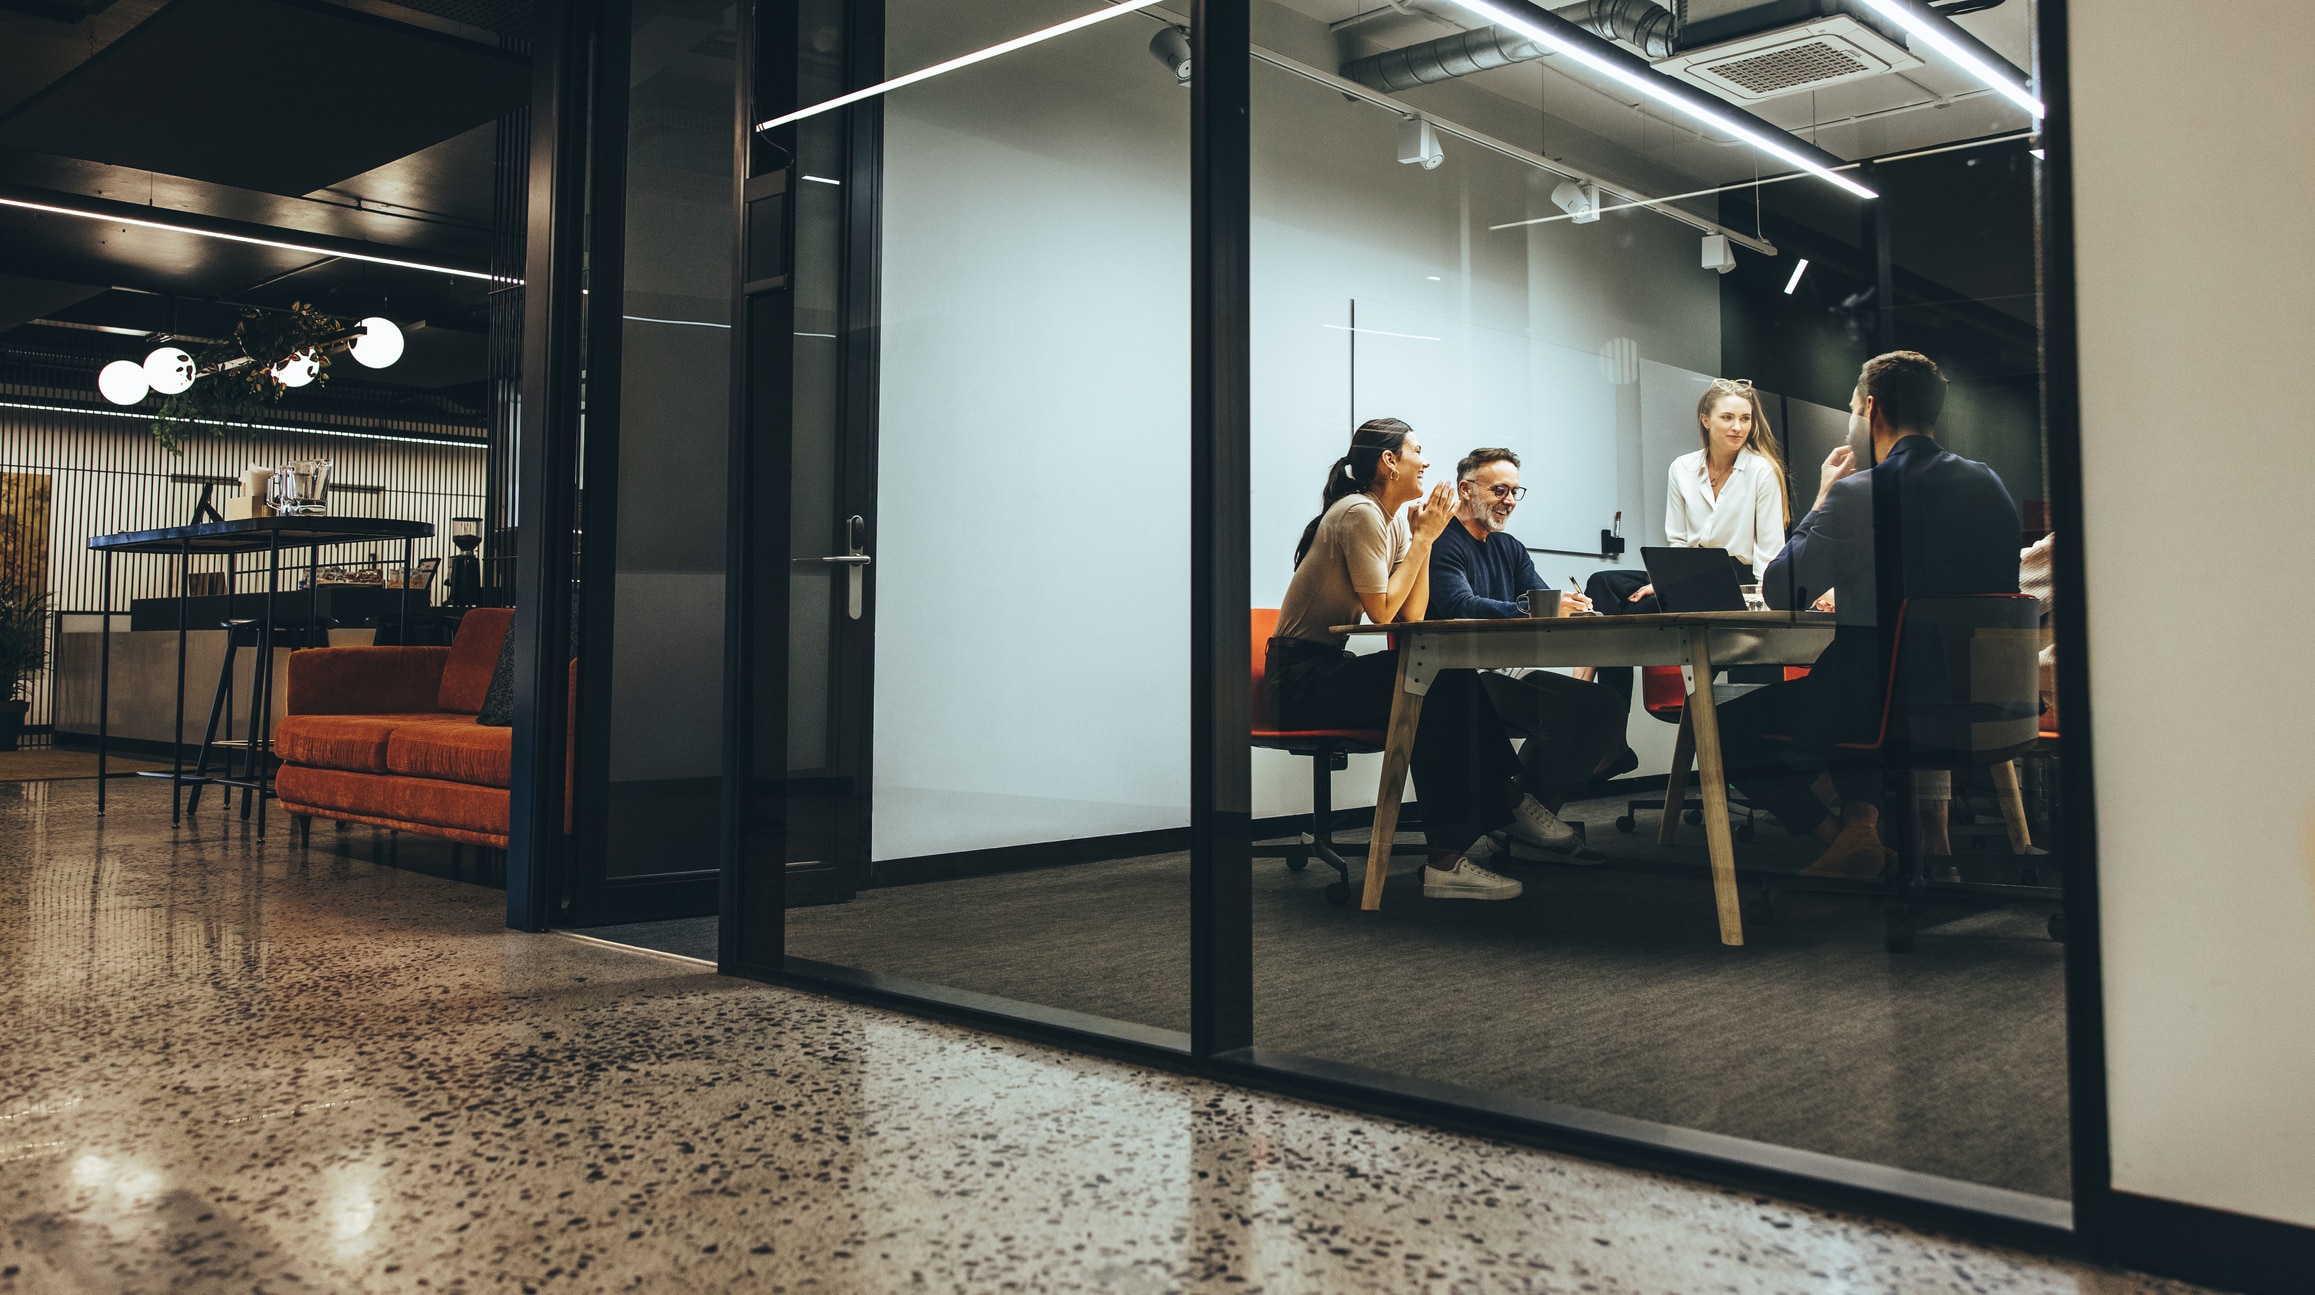 Who Uses and Benefits from Coworking Spaces?